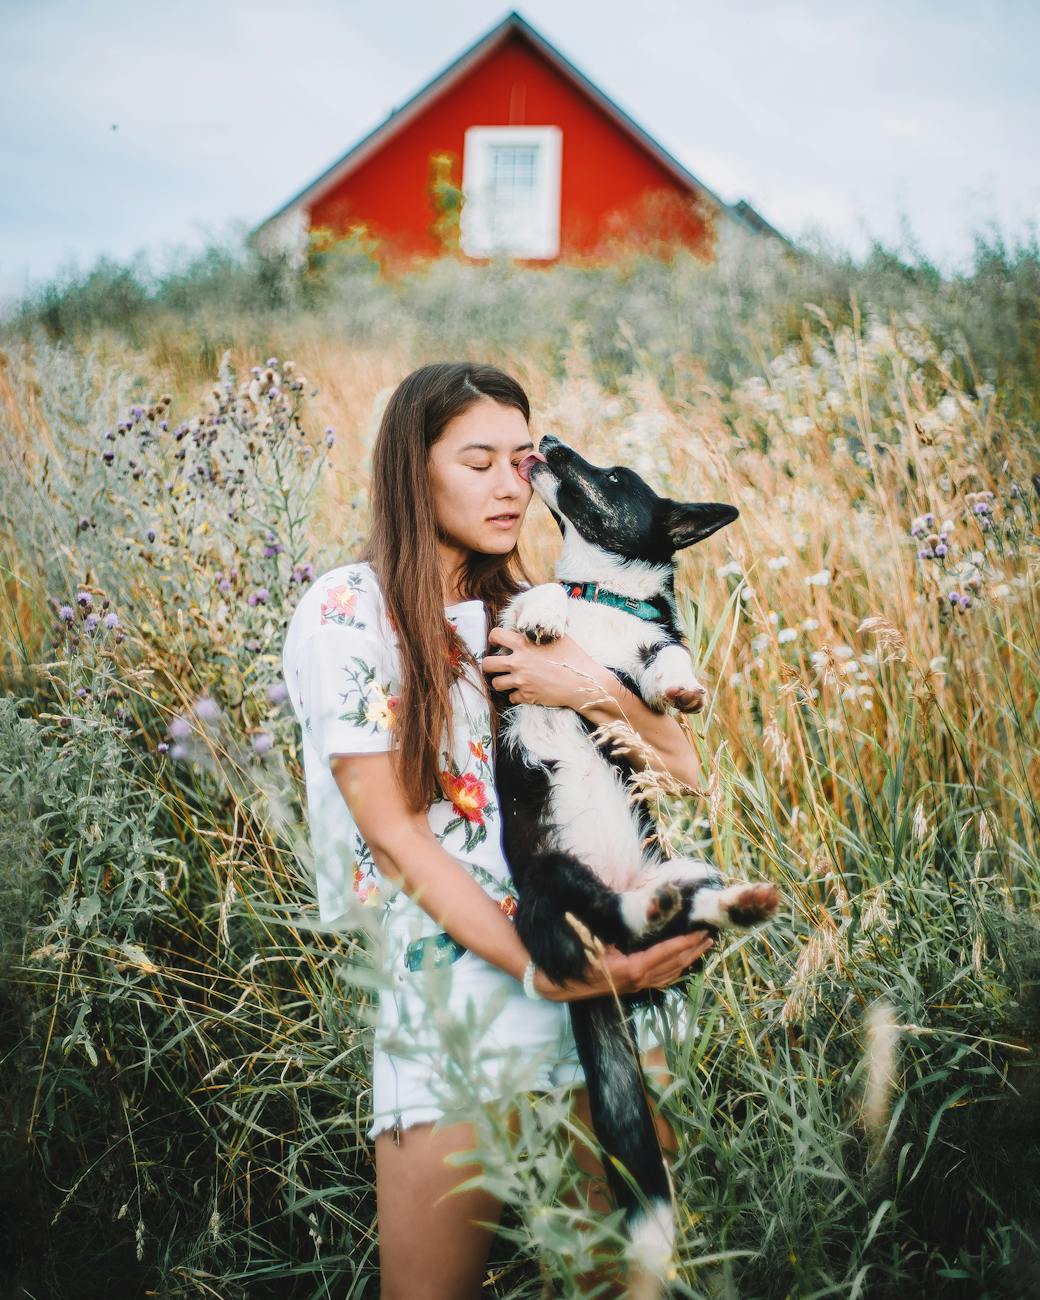 Slim woman holding dog in meadow by house under grey sky · Free Stock Photo